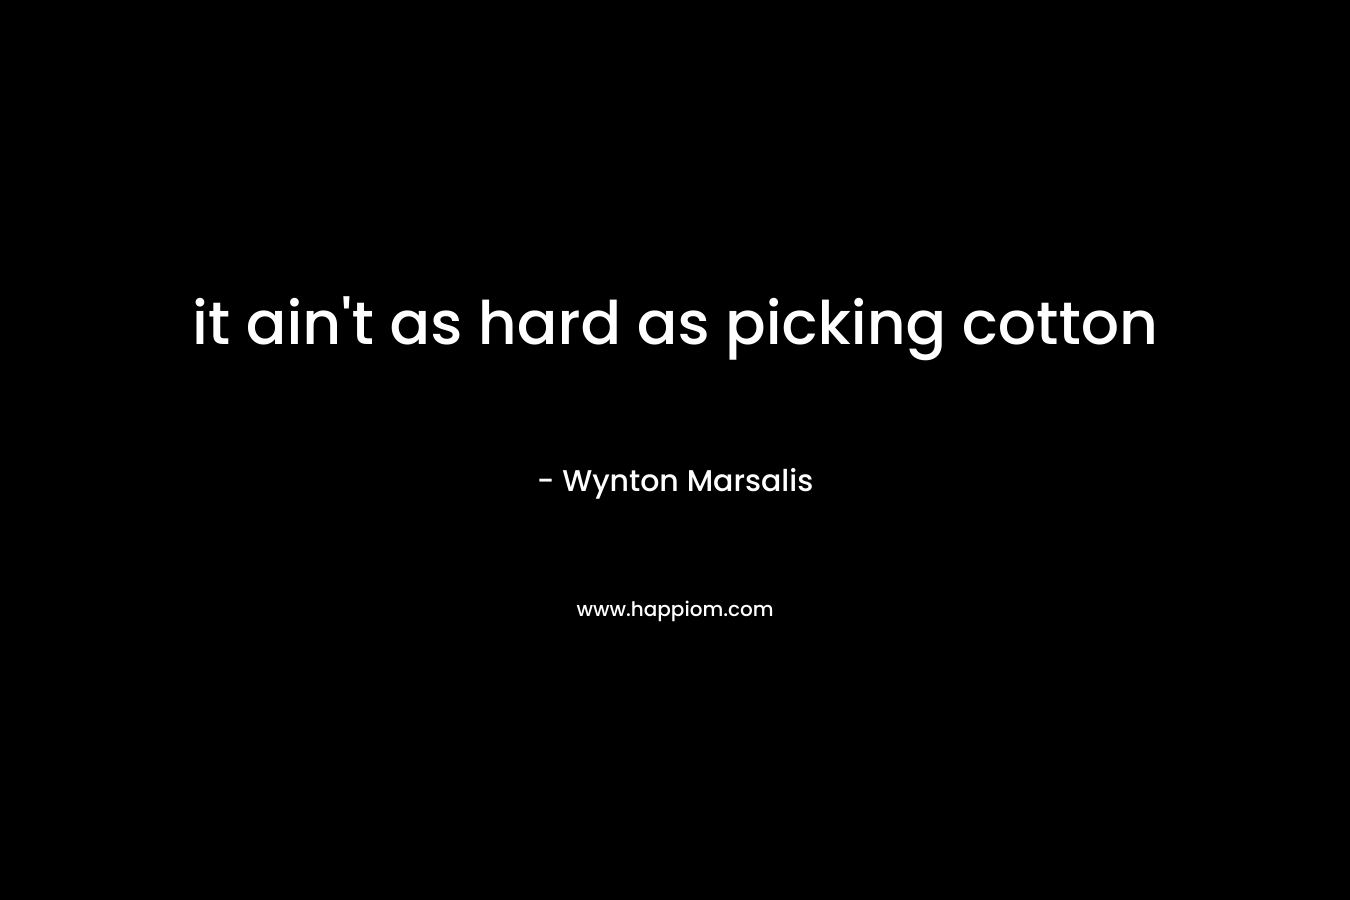 it ain't as hard as picking cotton